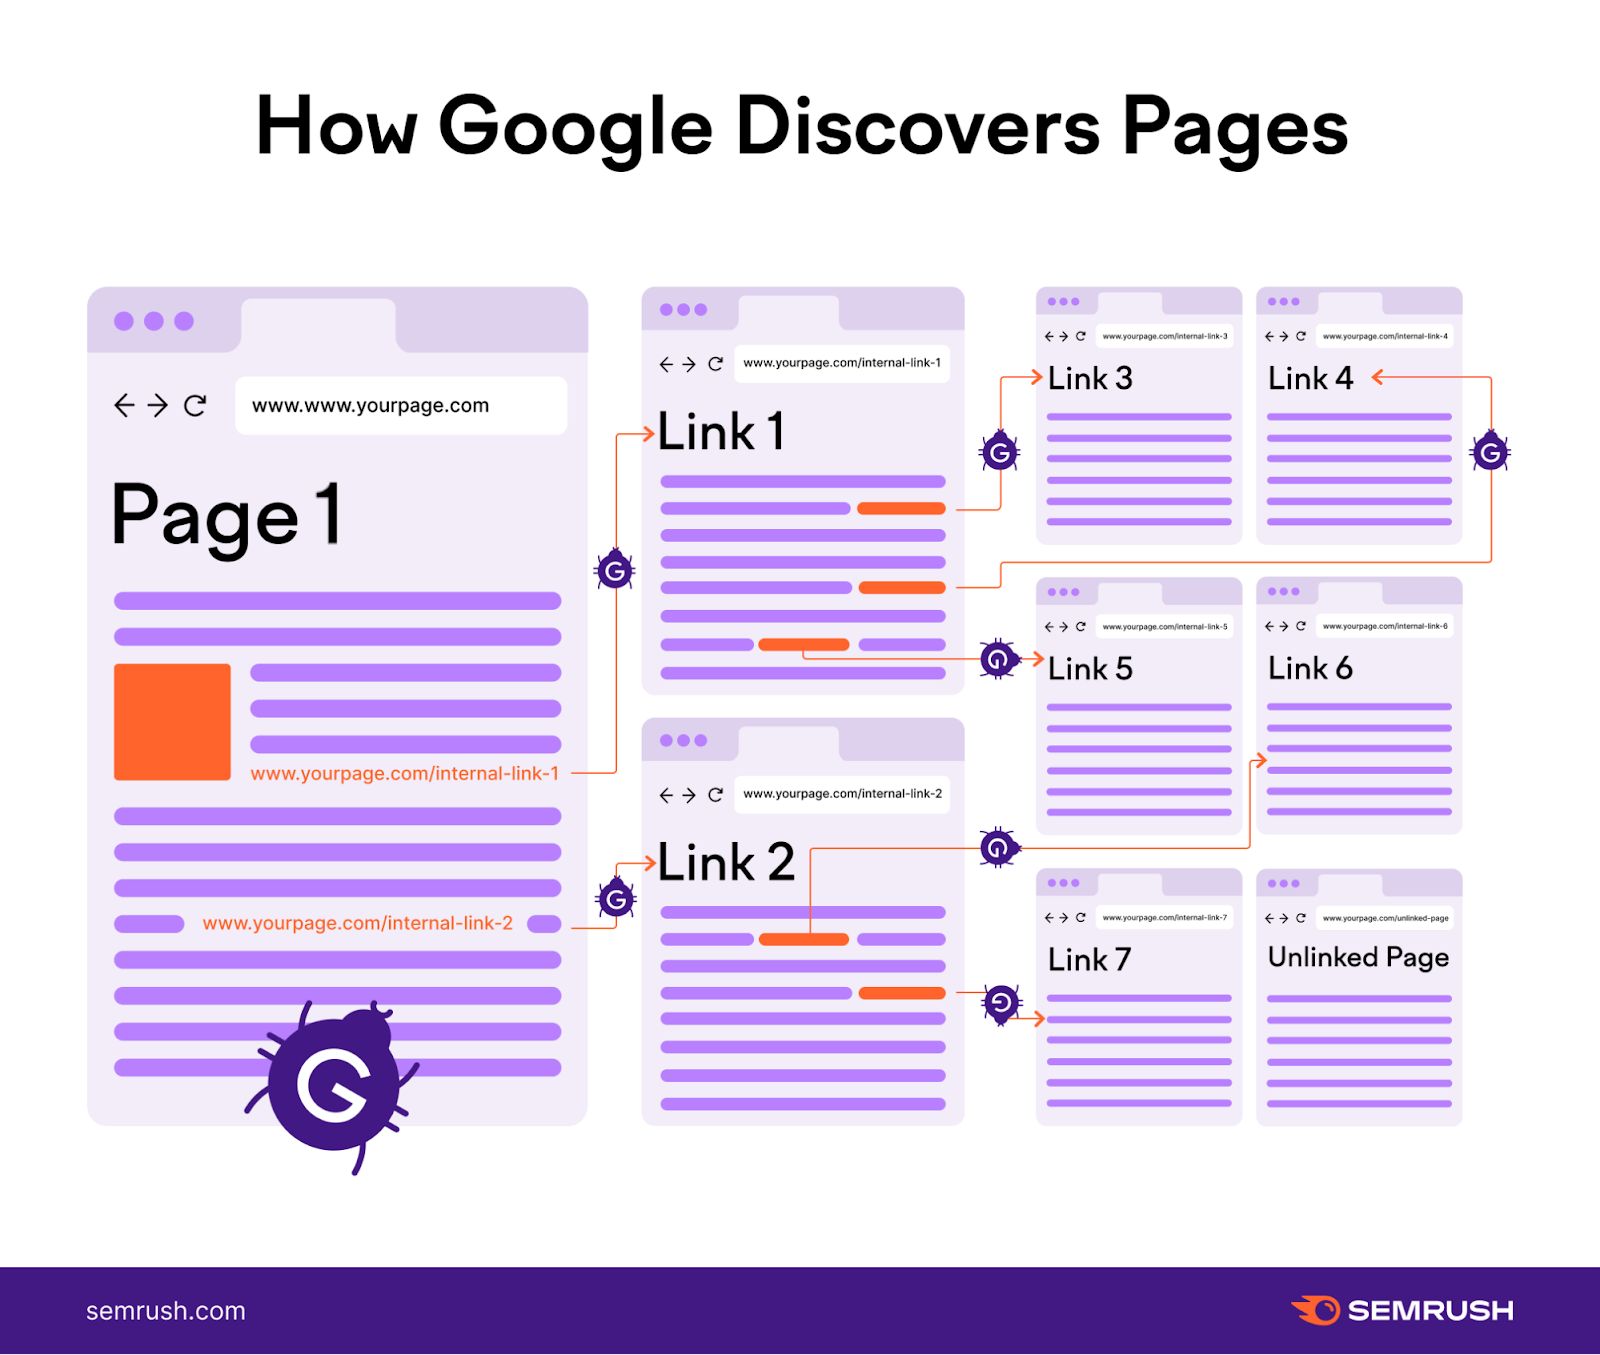 a simple illustration showing how Google discovers pages